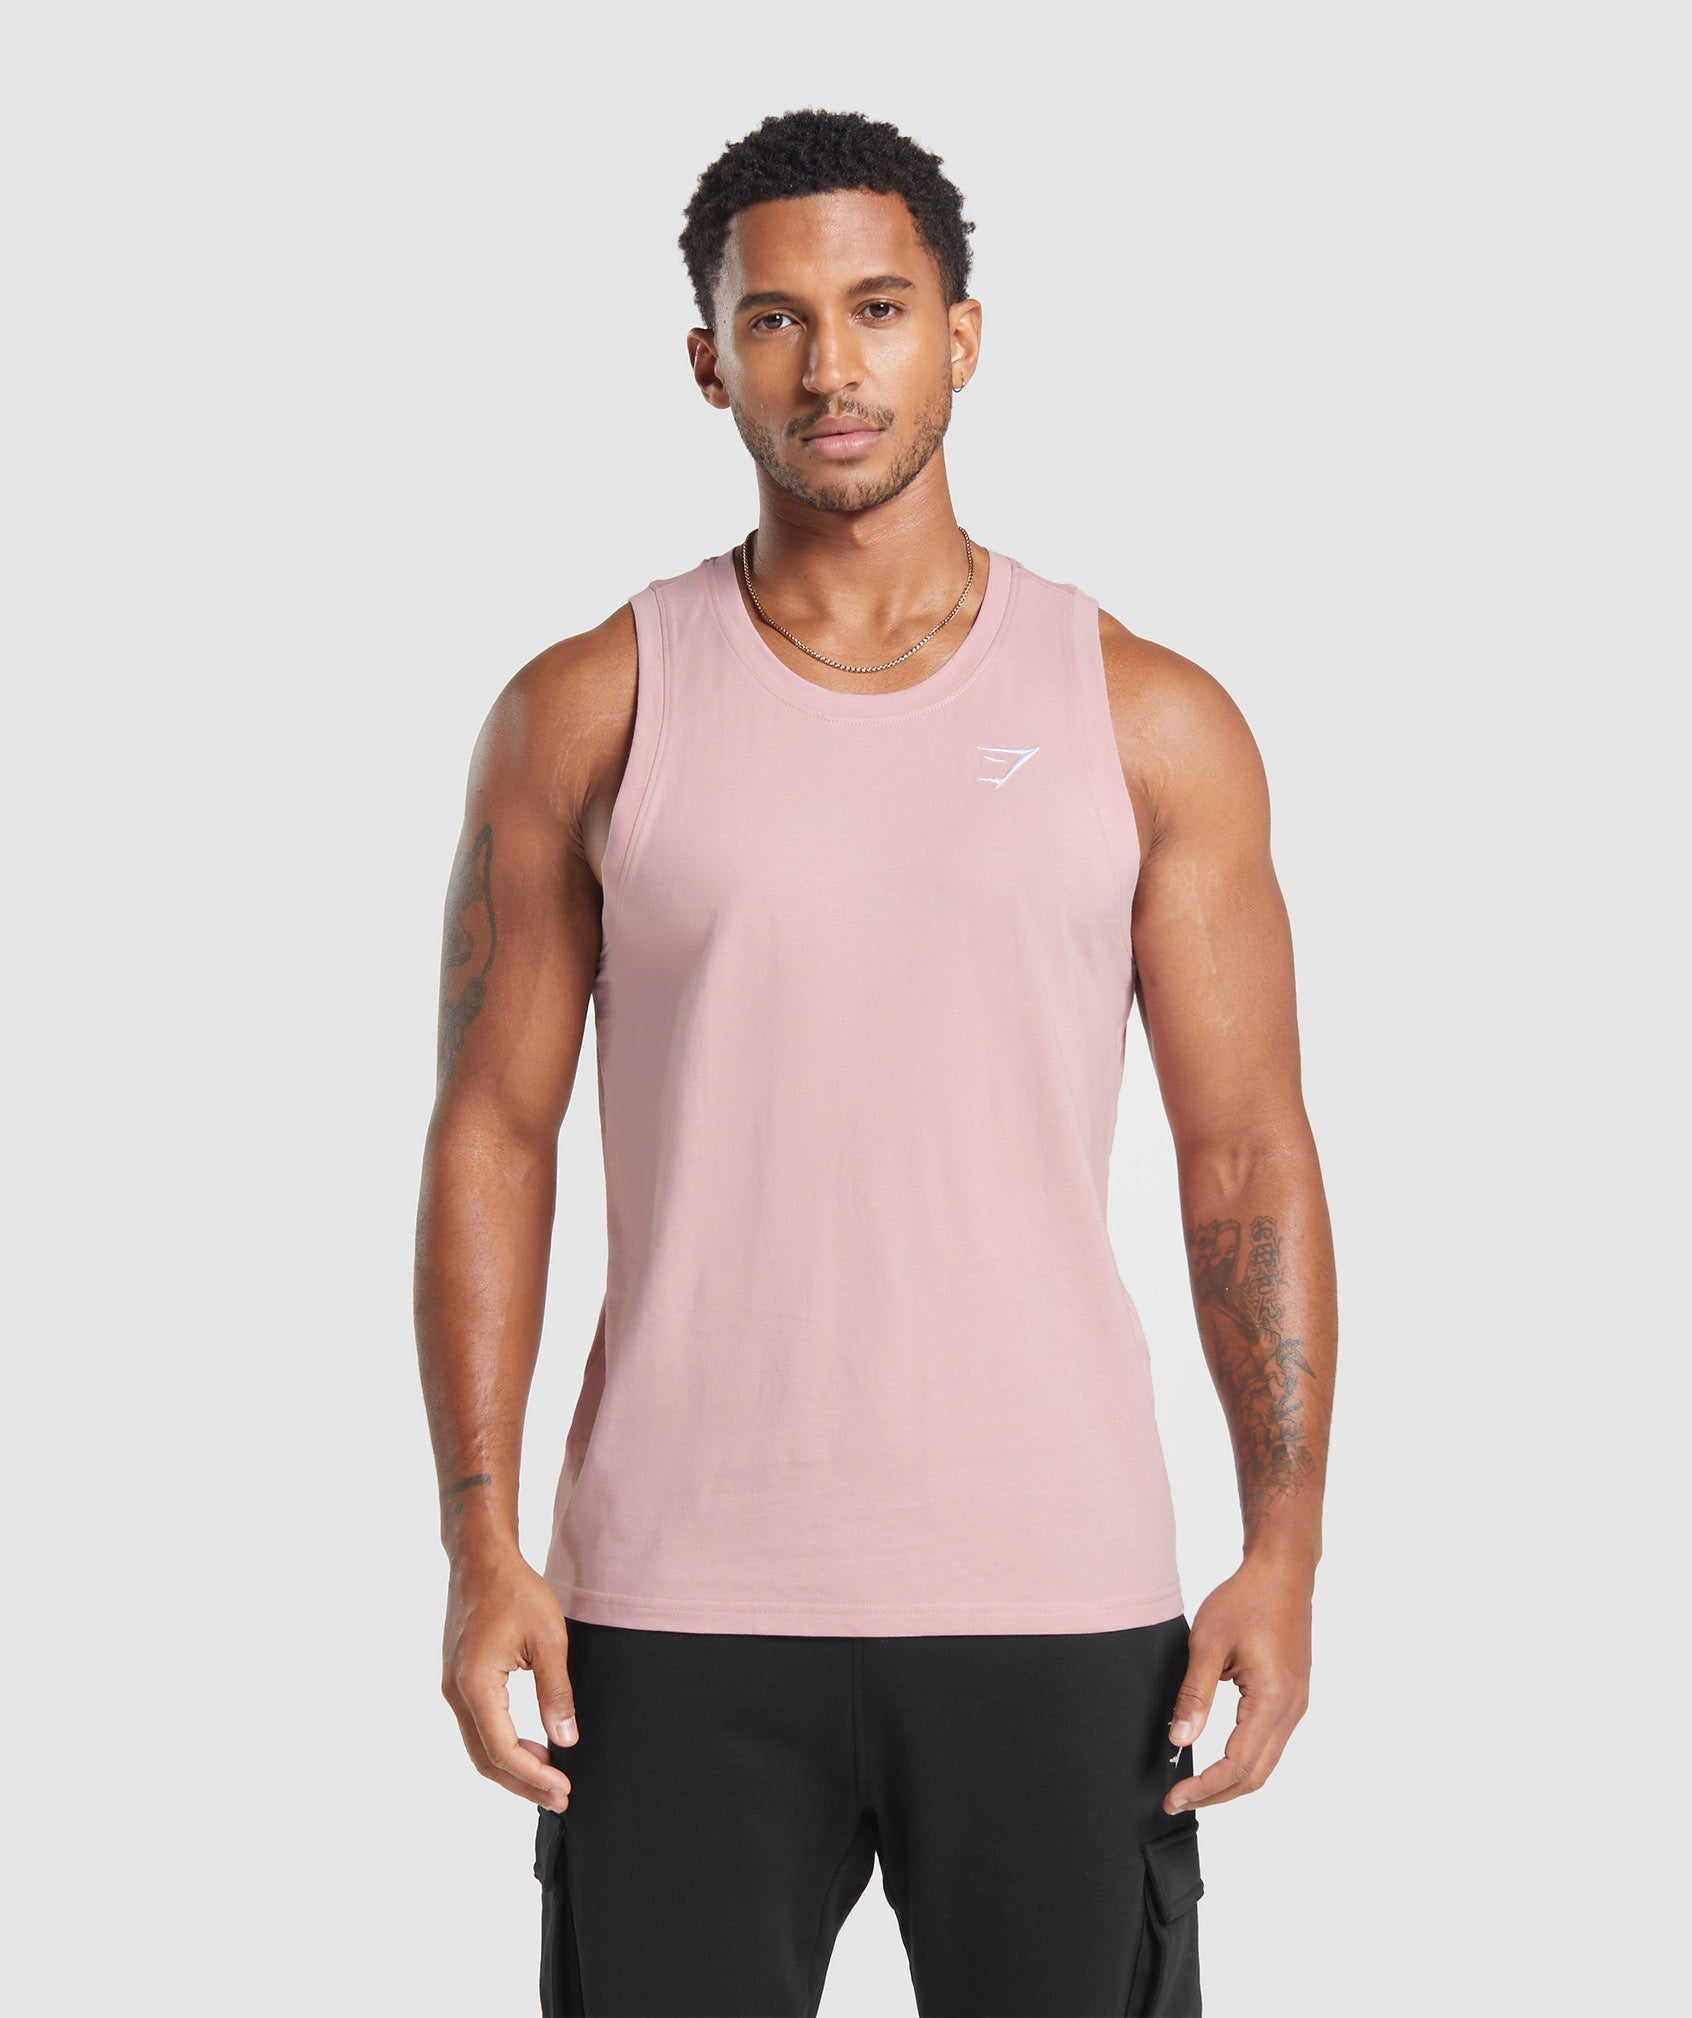 Crest Tank in {{variantColor} is out of stock